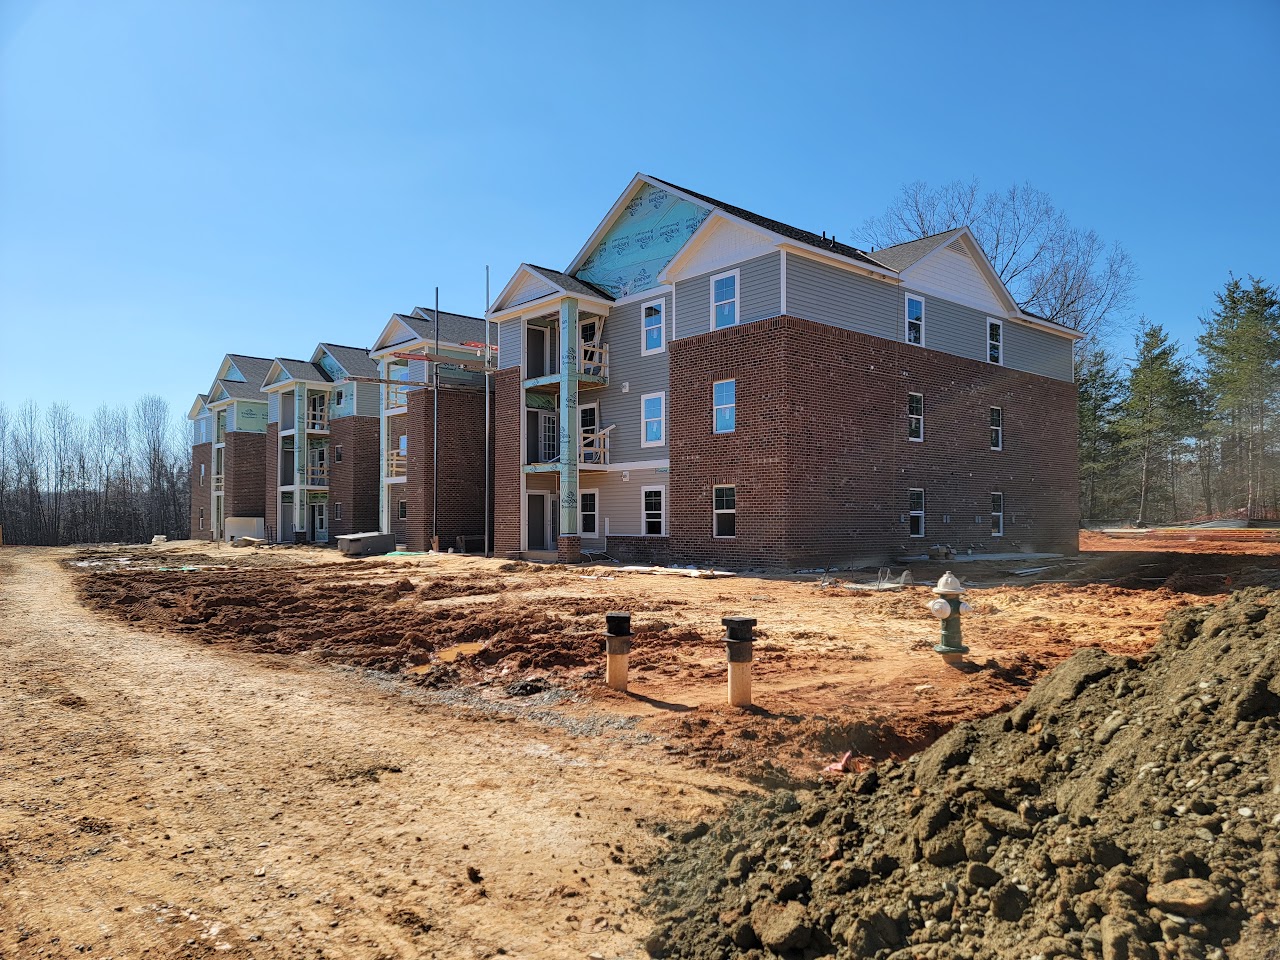 Photo of THE LOFTS AT ELMSLEY CROSSING. Affordable housing located at 506 511 KALLAMDALE RD GREENSBORO, NC 27406